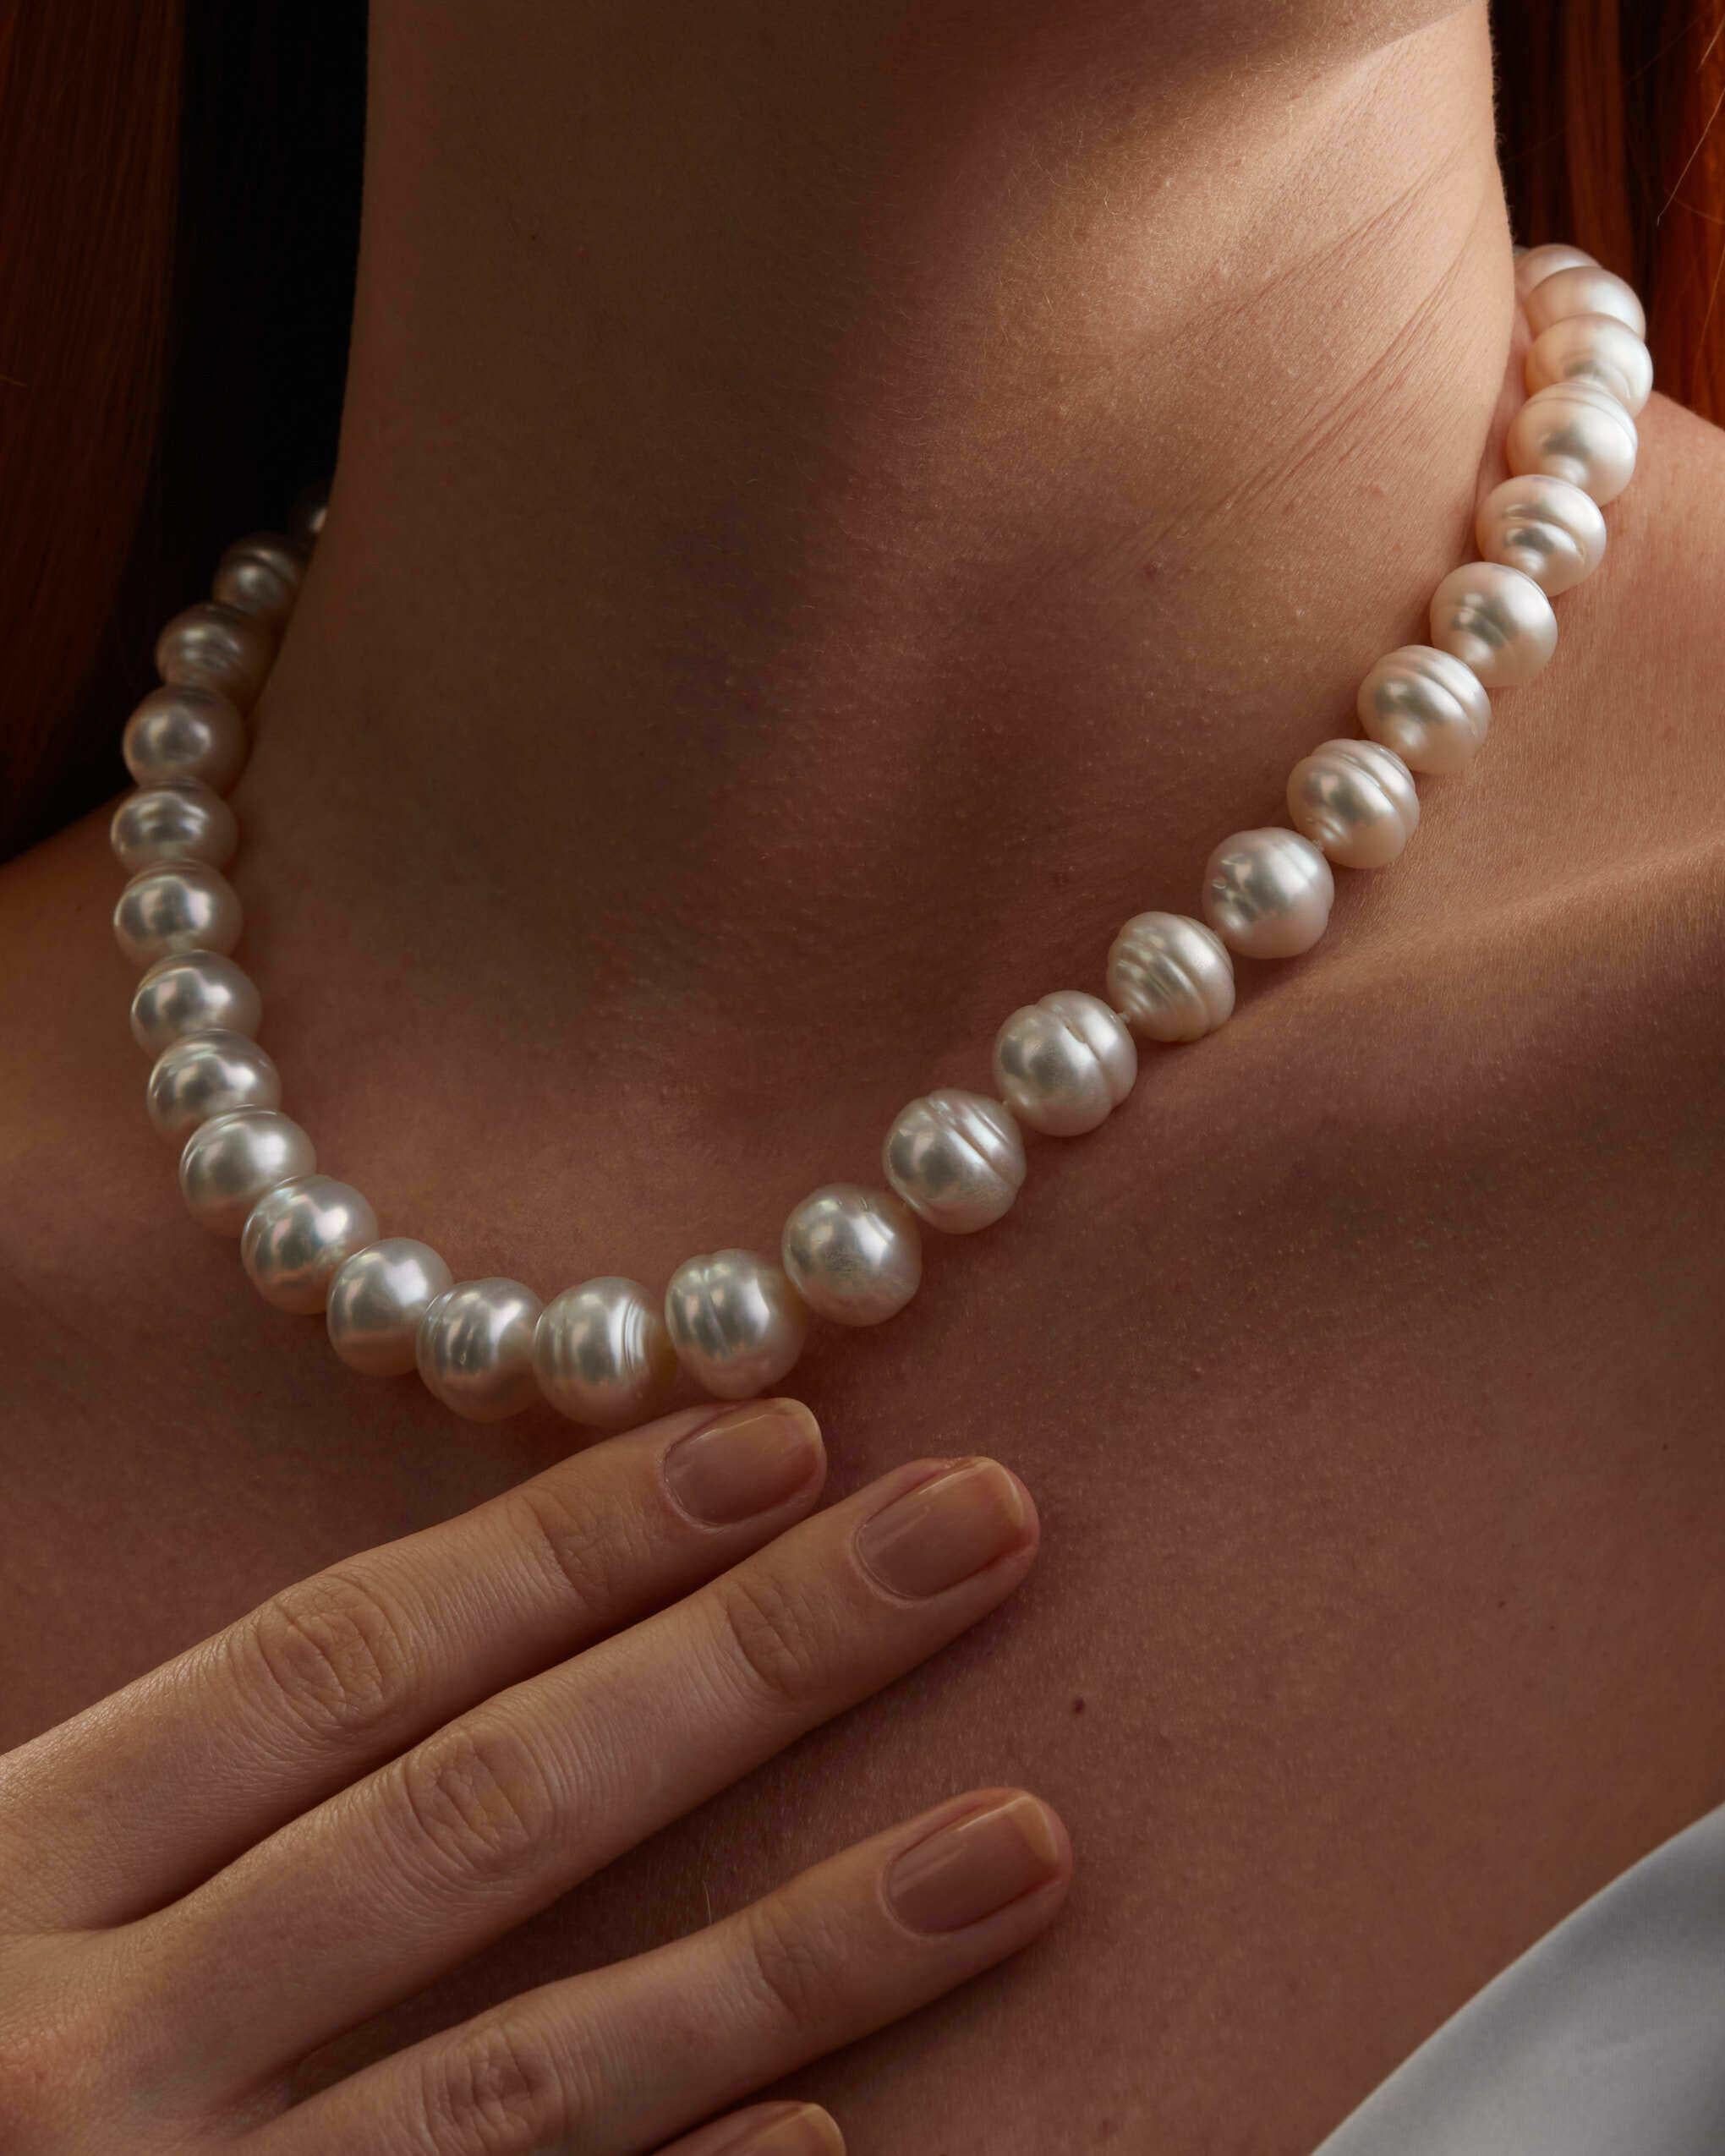 A beautiful Australian South Sea Circle Pearl Strand Necklace.

There is only one way to execute a necklace this universal and iconic – with perfection. Luminous South Sea pearls, sustainably harvested from the pristine waters off the coast of